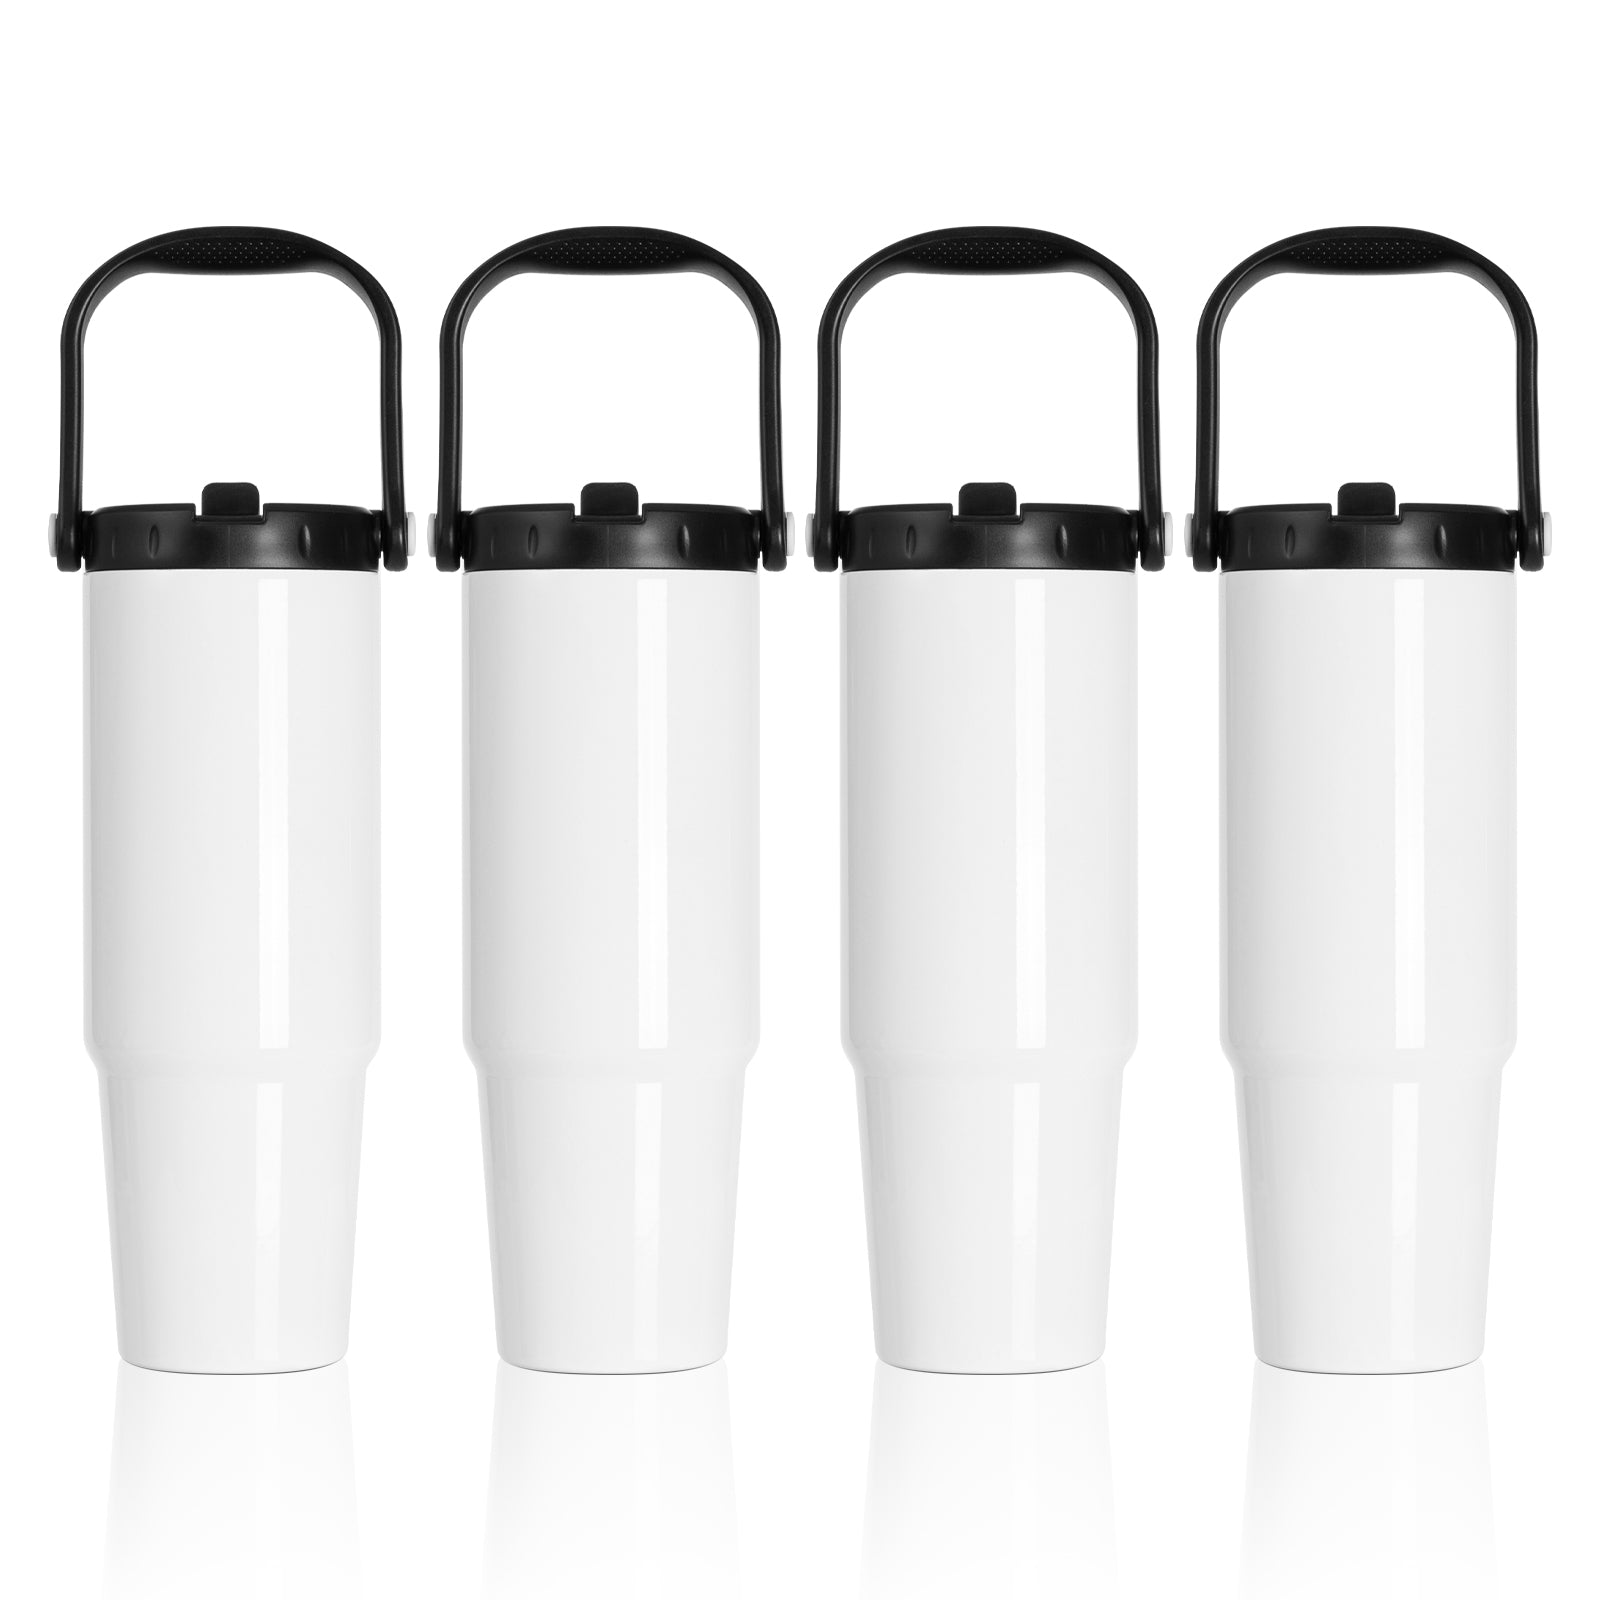 PYD Life 2 Pack Sublimation 40 oz Tumblers with Handle Blanks White Coffee Mugs Insulated Reusable Travel Cups with Lid and Stainless Straw for